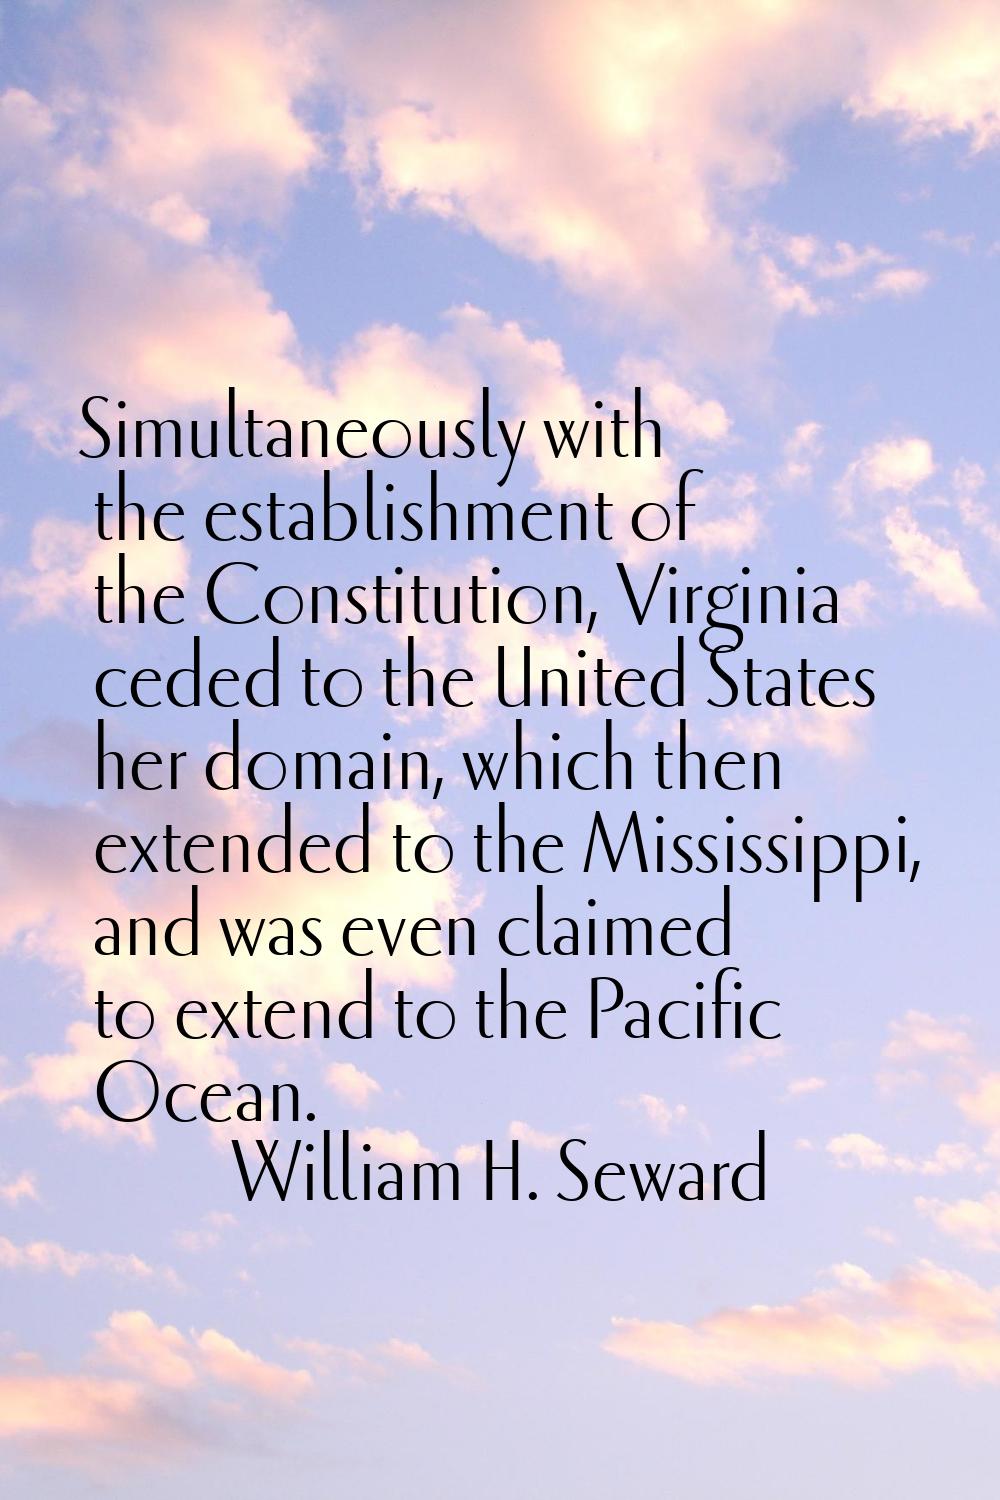 Simultaneously with the establishment of the Constitution, Virginia ceded to the United States her 